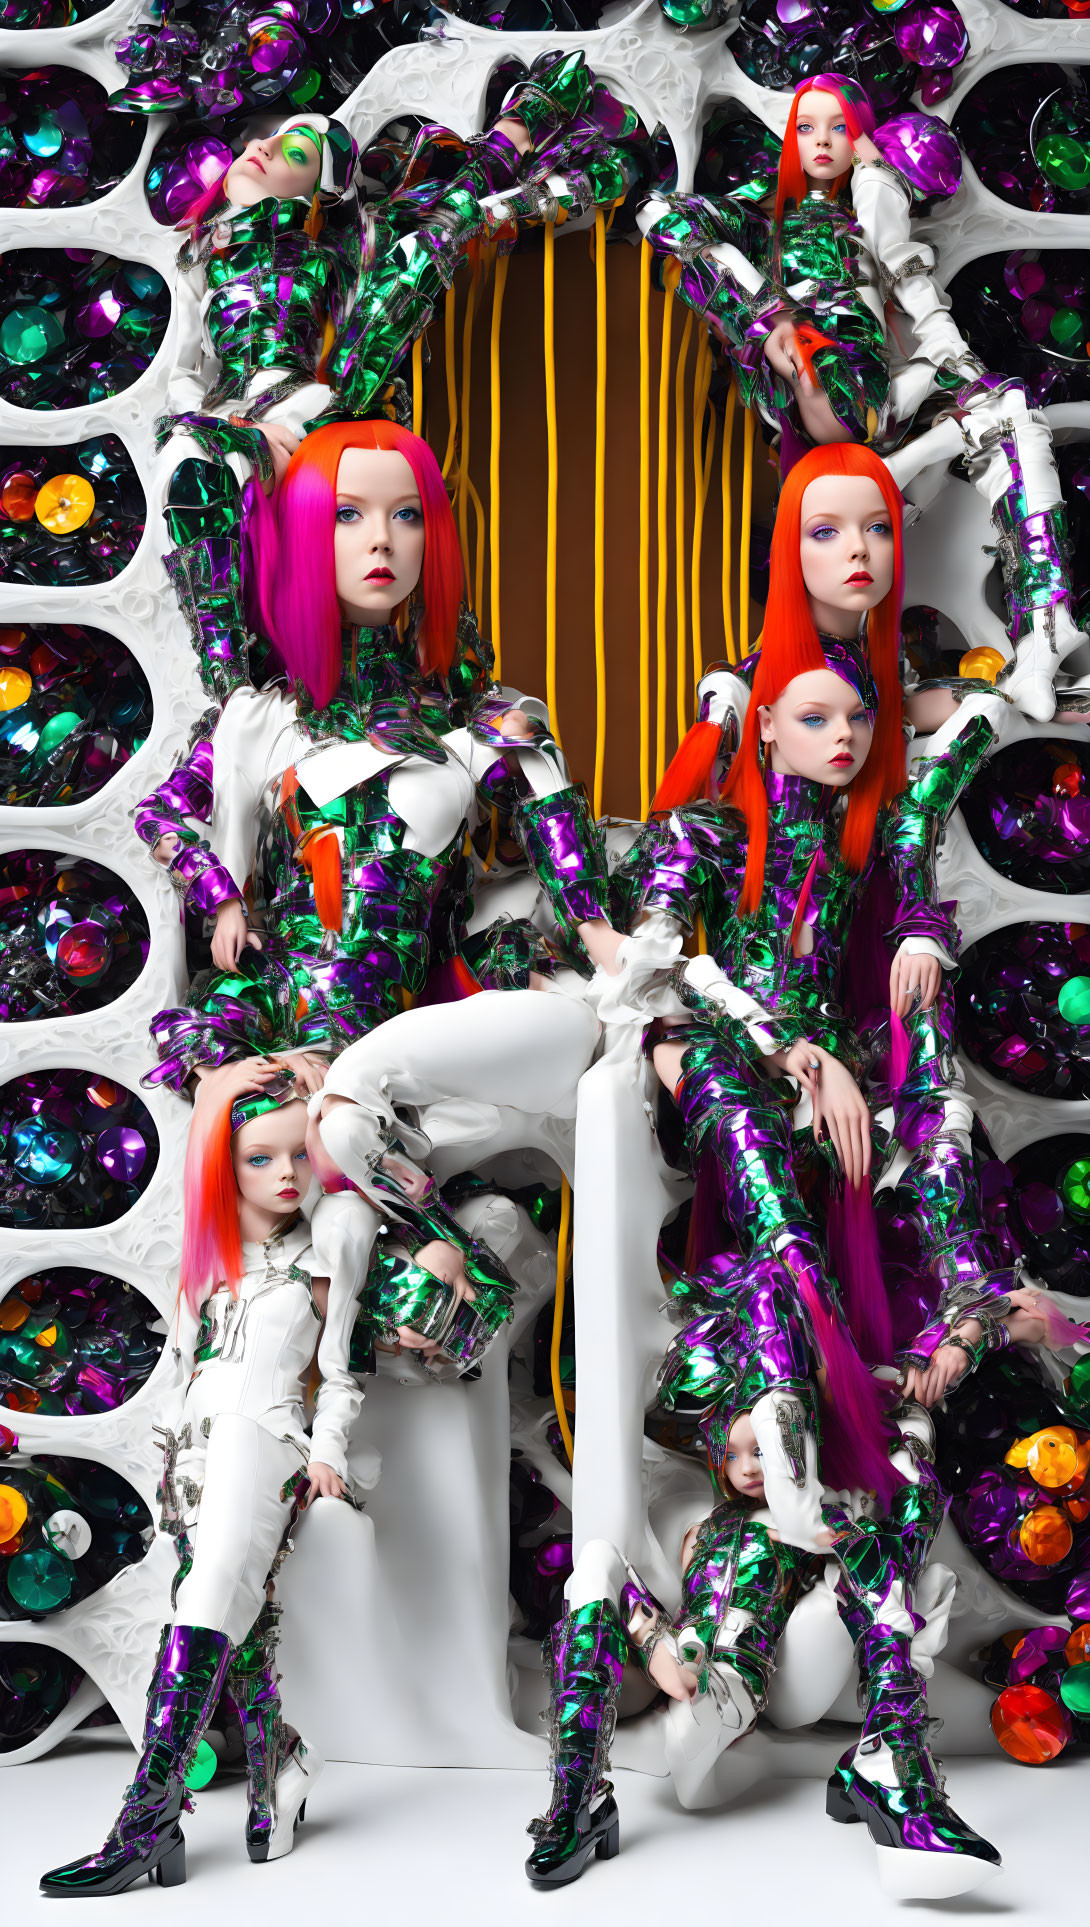 Vibrant fashion shoot: models in silver outfits with purple and red wigs, posing with circular